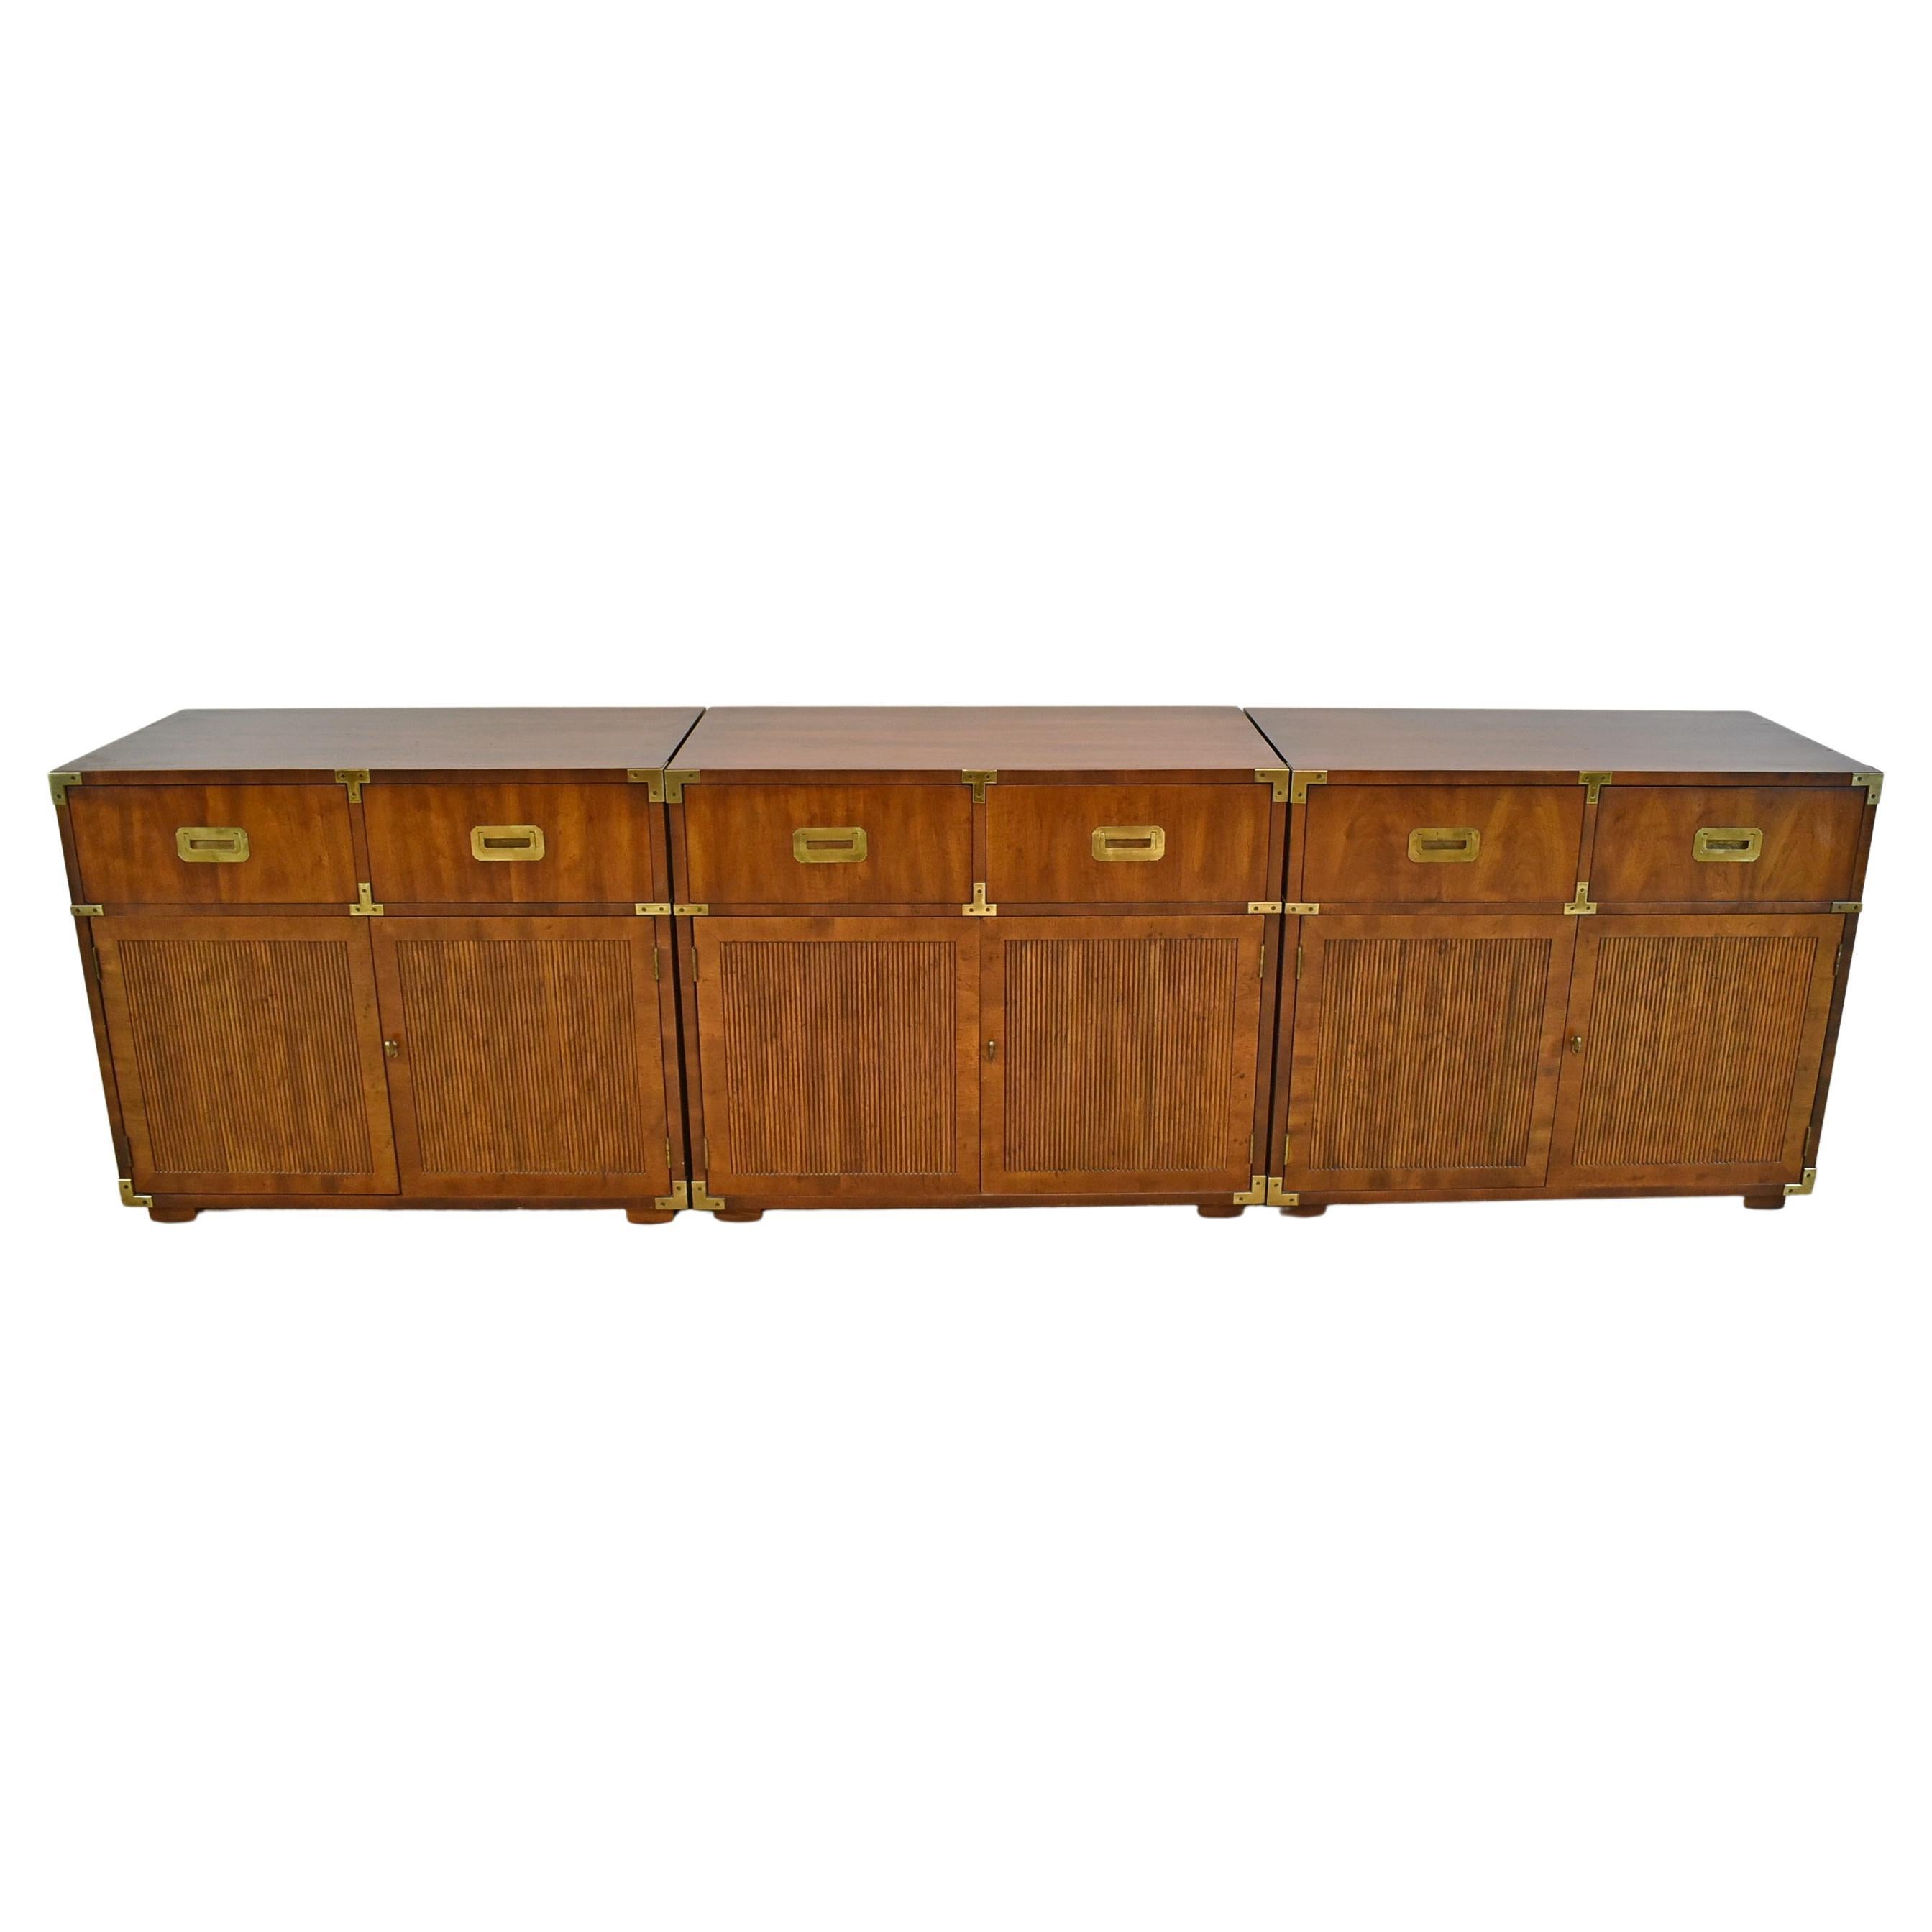 Henredon Campaign Style Walnut Chests, 1 Available